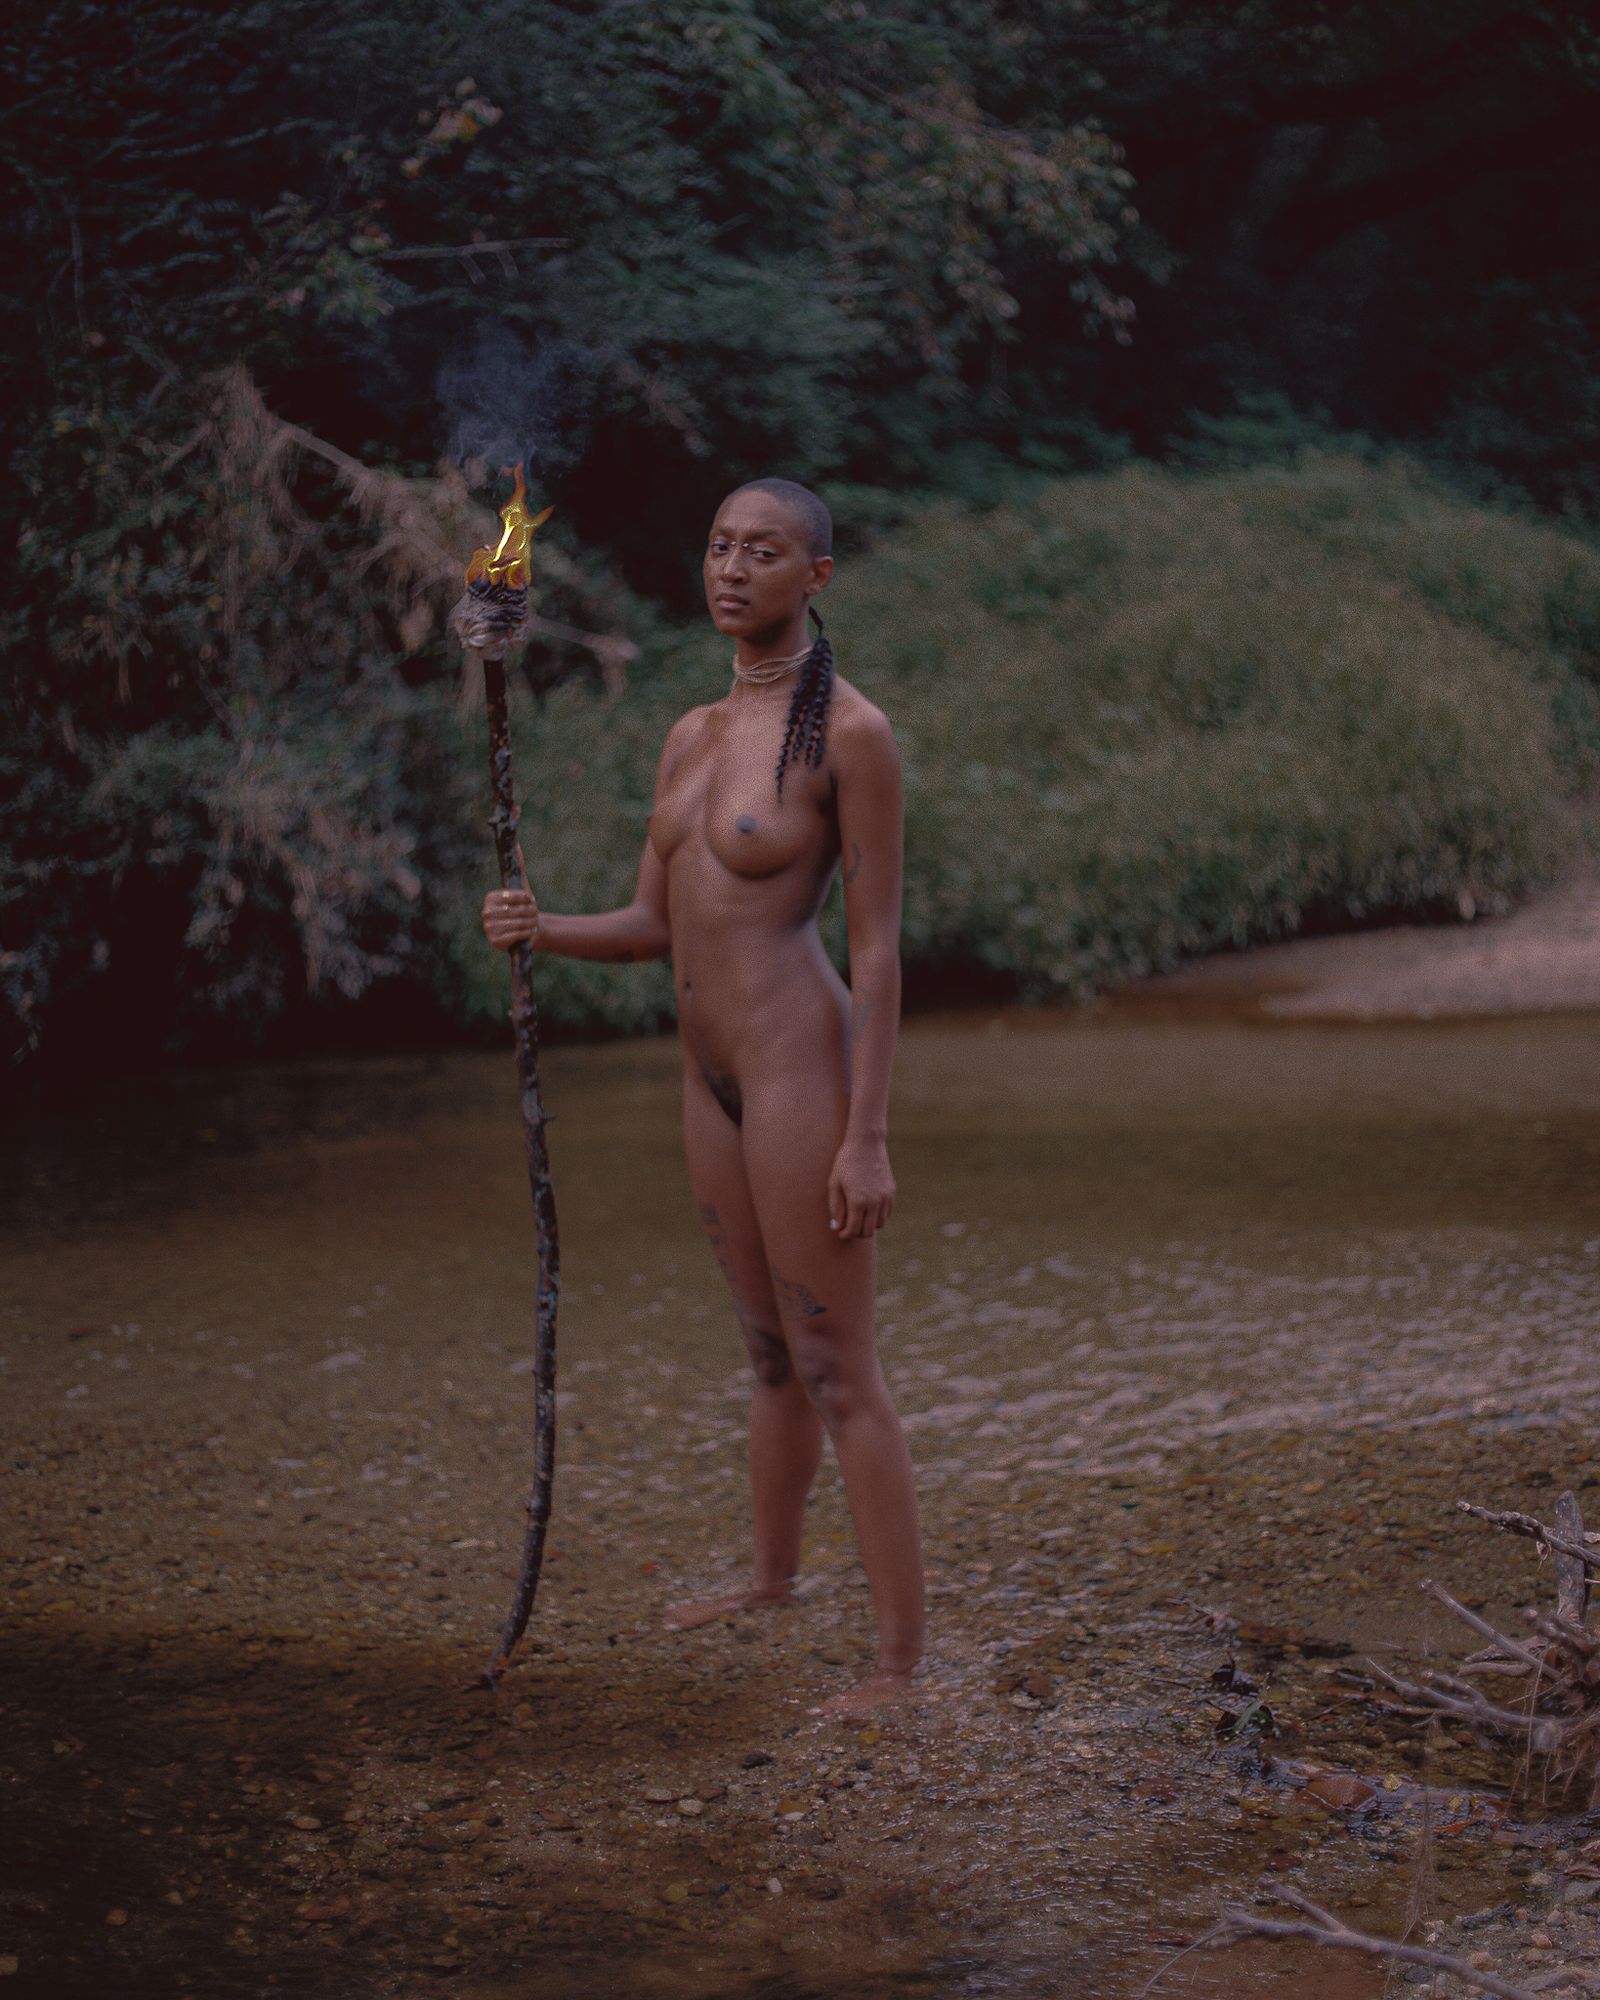 © cree moore - Image from the Containing Intimacy photography project